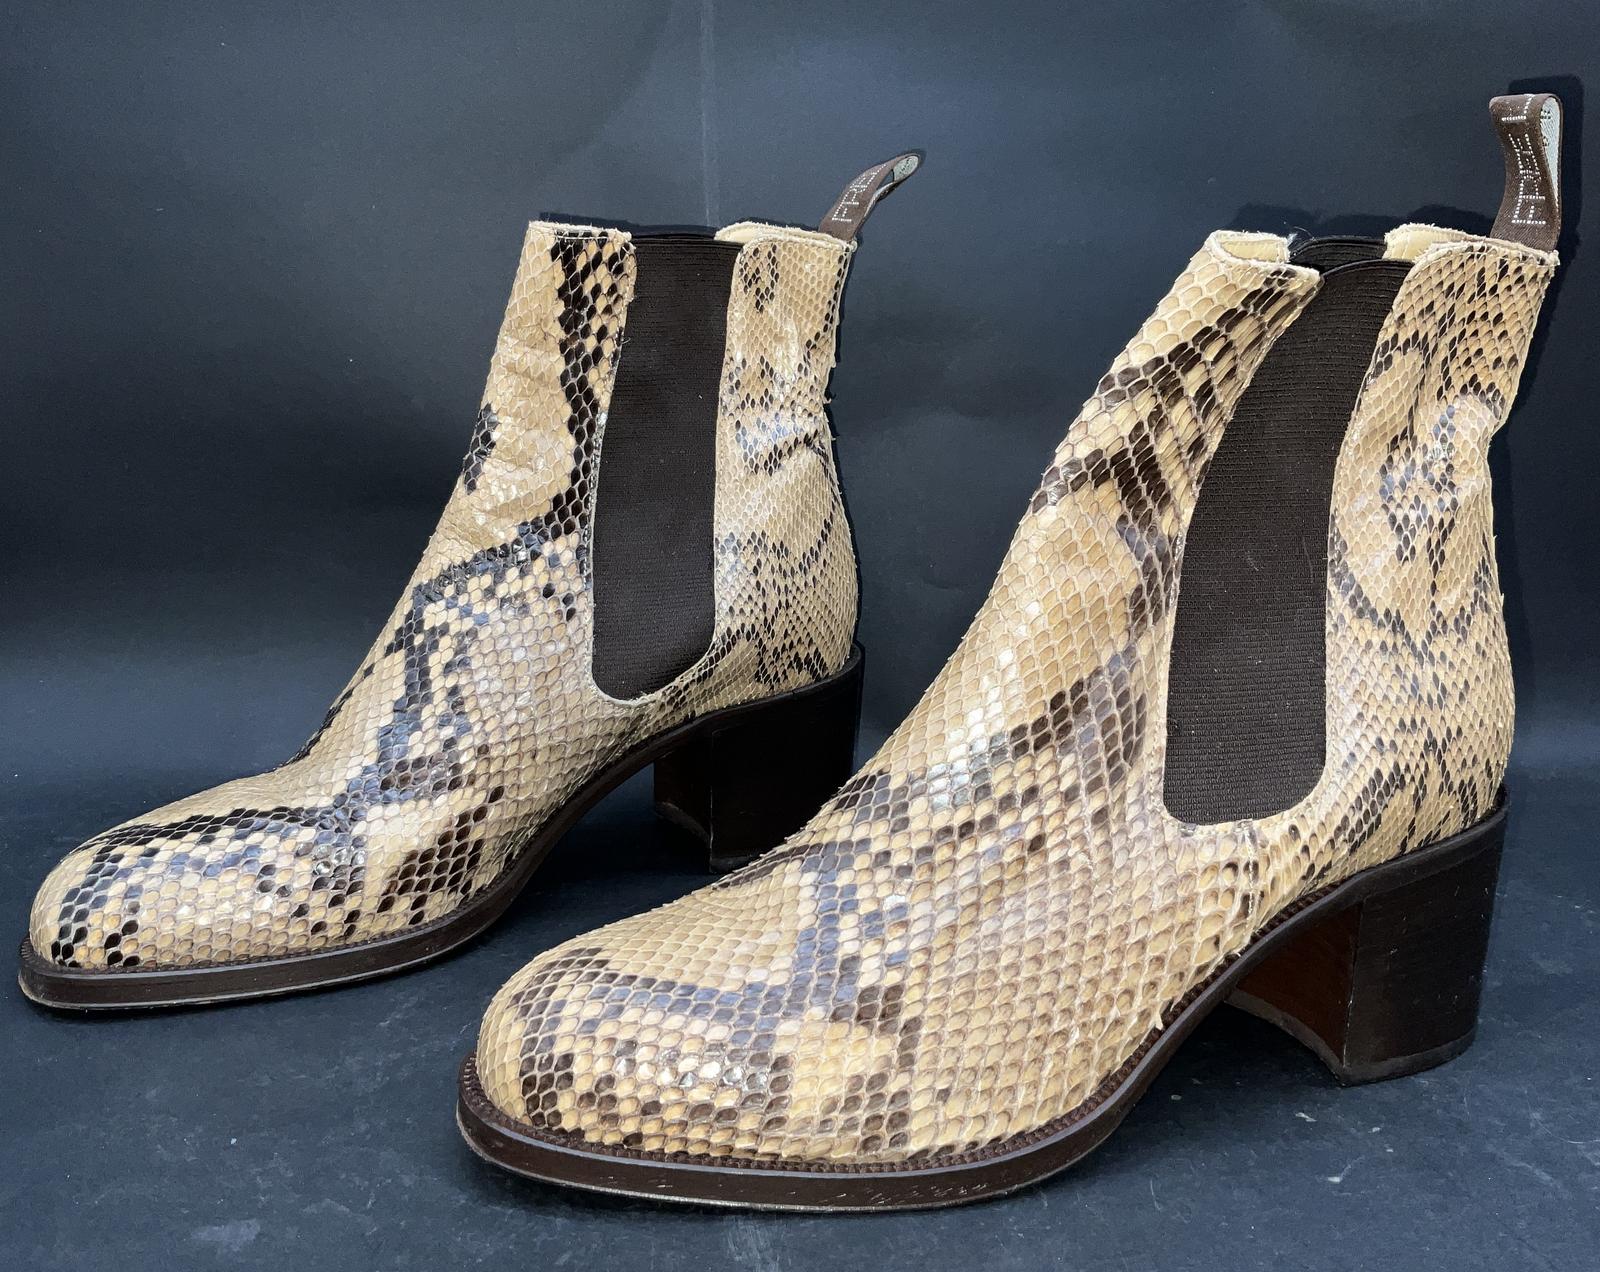 PAIR OF FREELANCE CLASSIC BOOTS IN SNAKESKIN | Teel Auctions